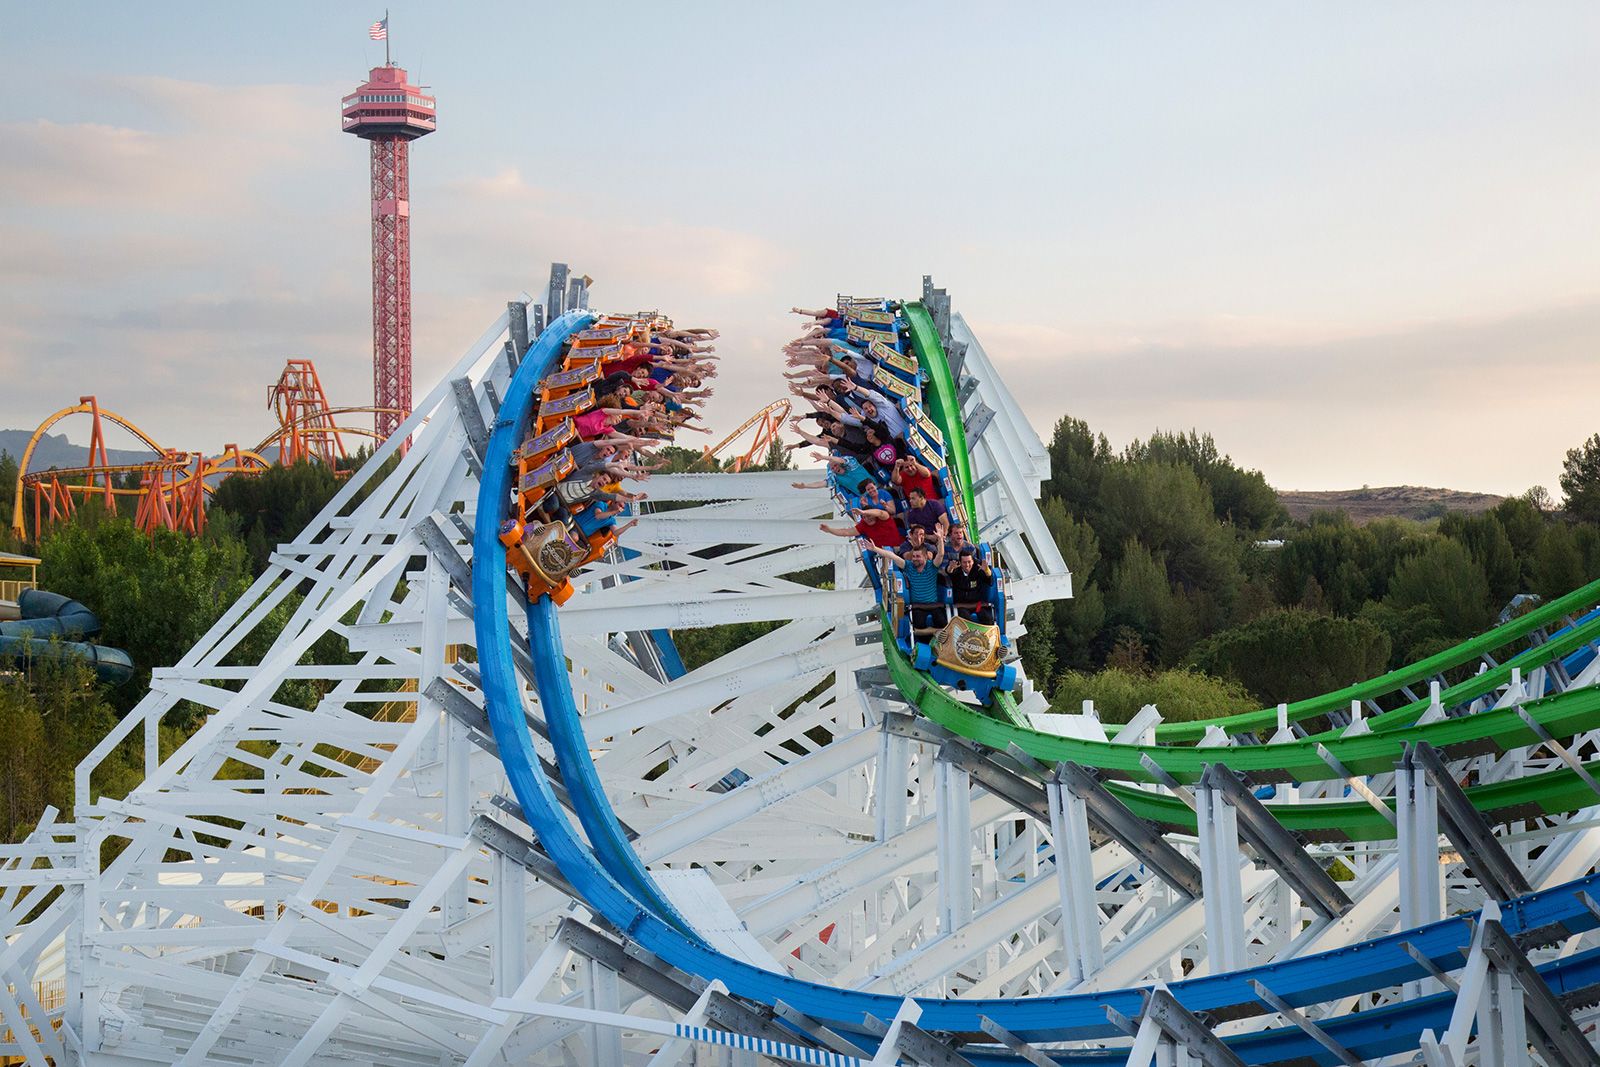 Does this little amusement park really have world's best wooden coaster?